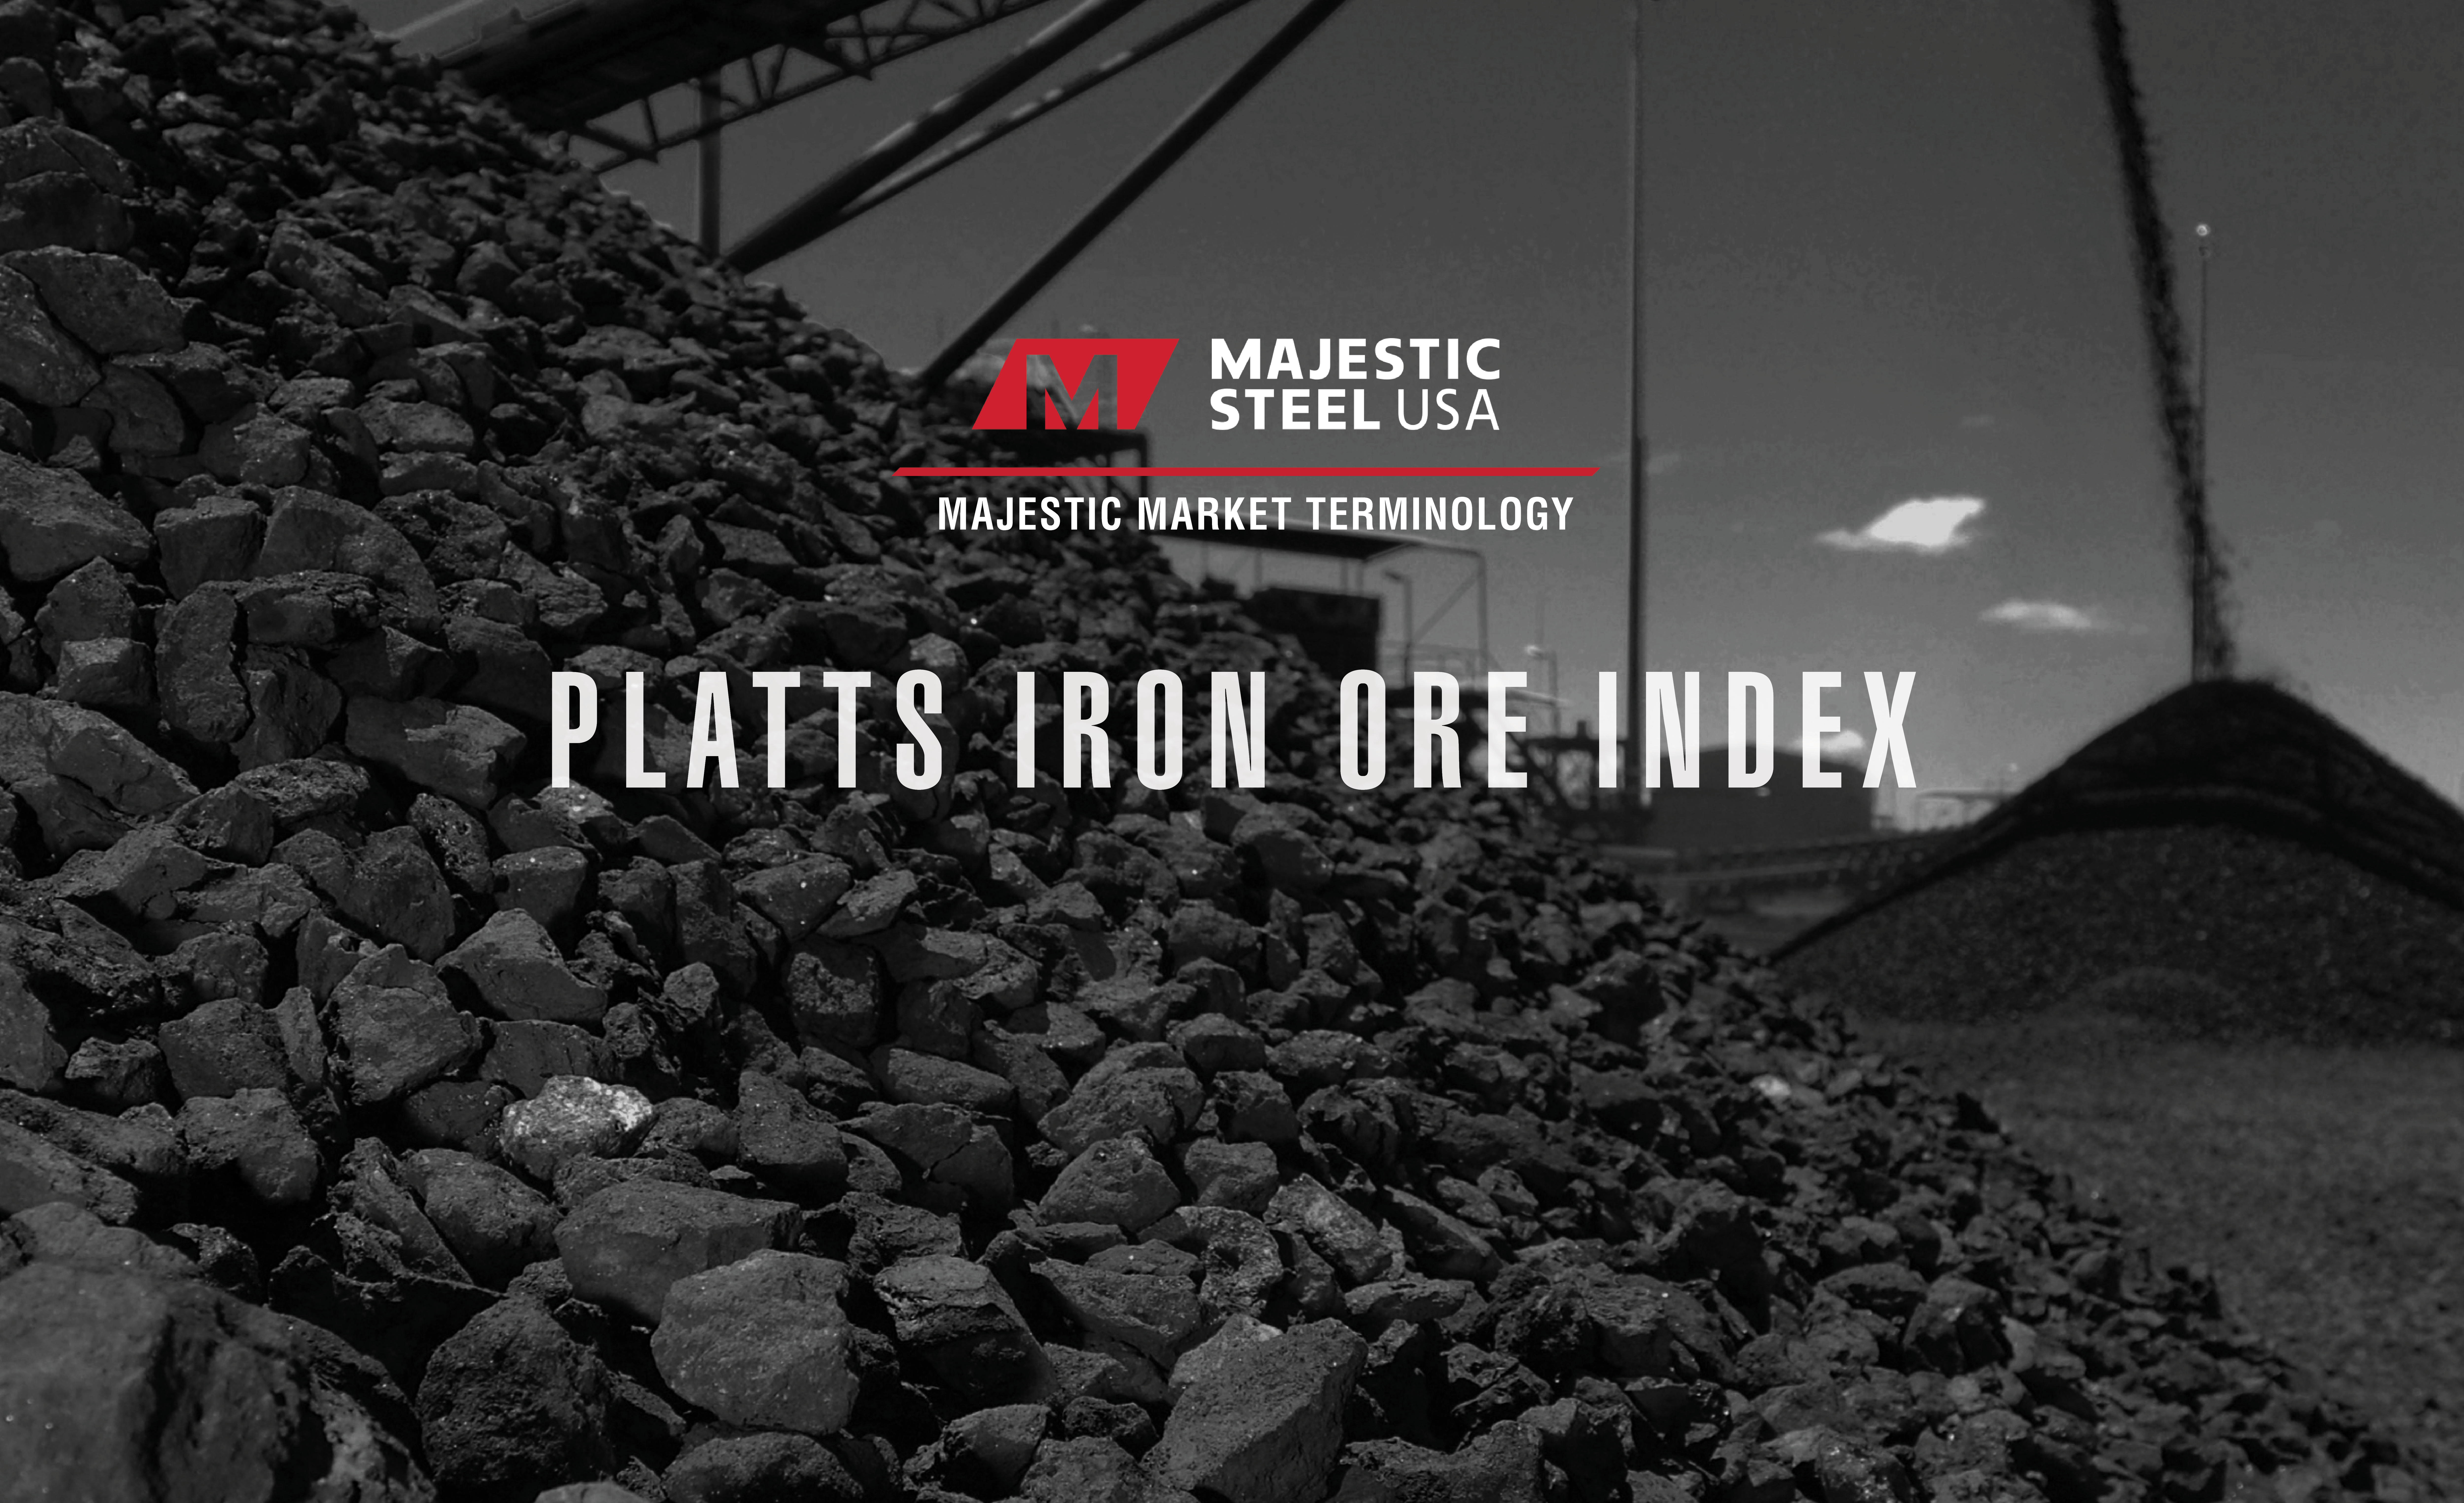 black and white image of a pile of iron ore to represent platts iron ore index